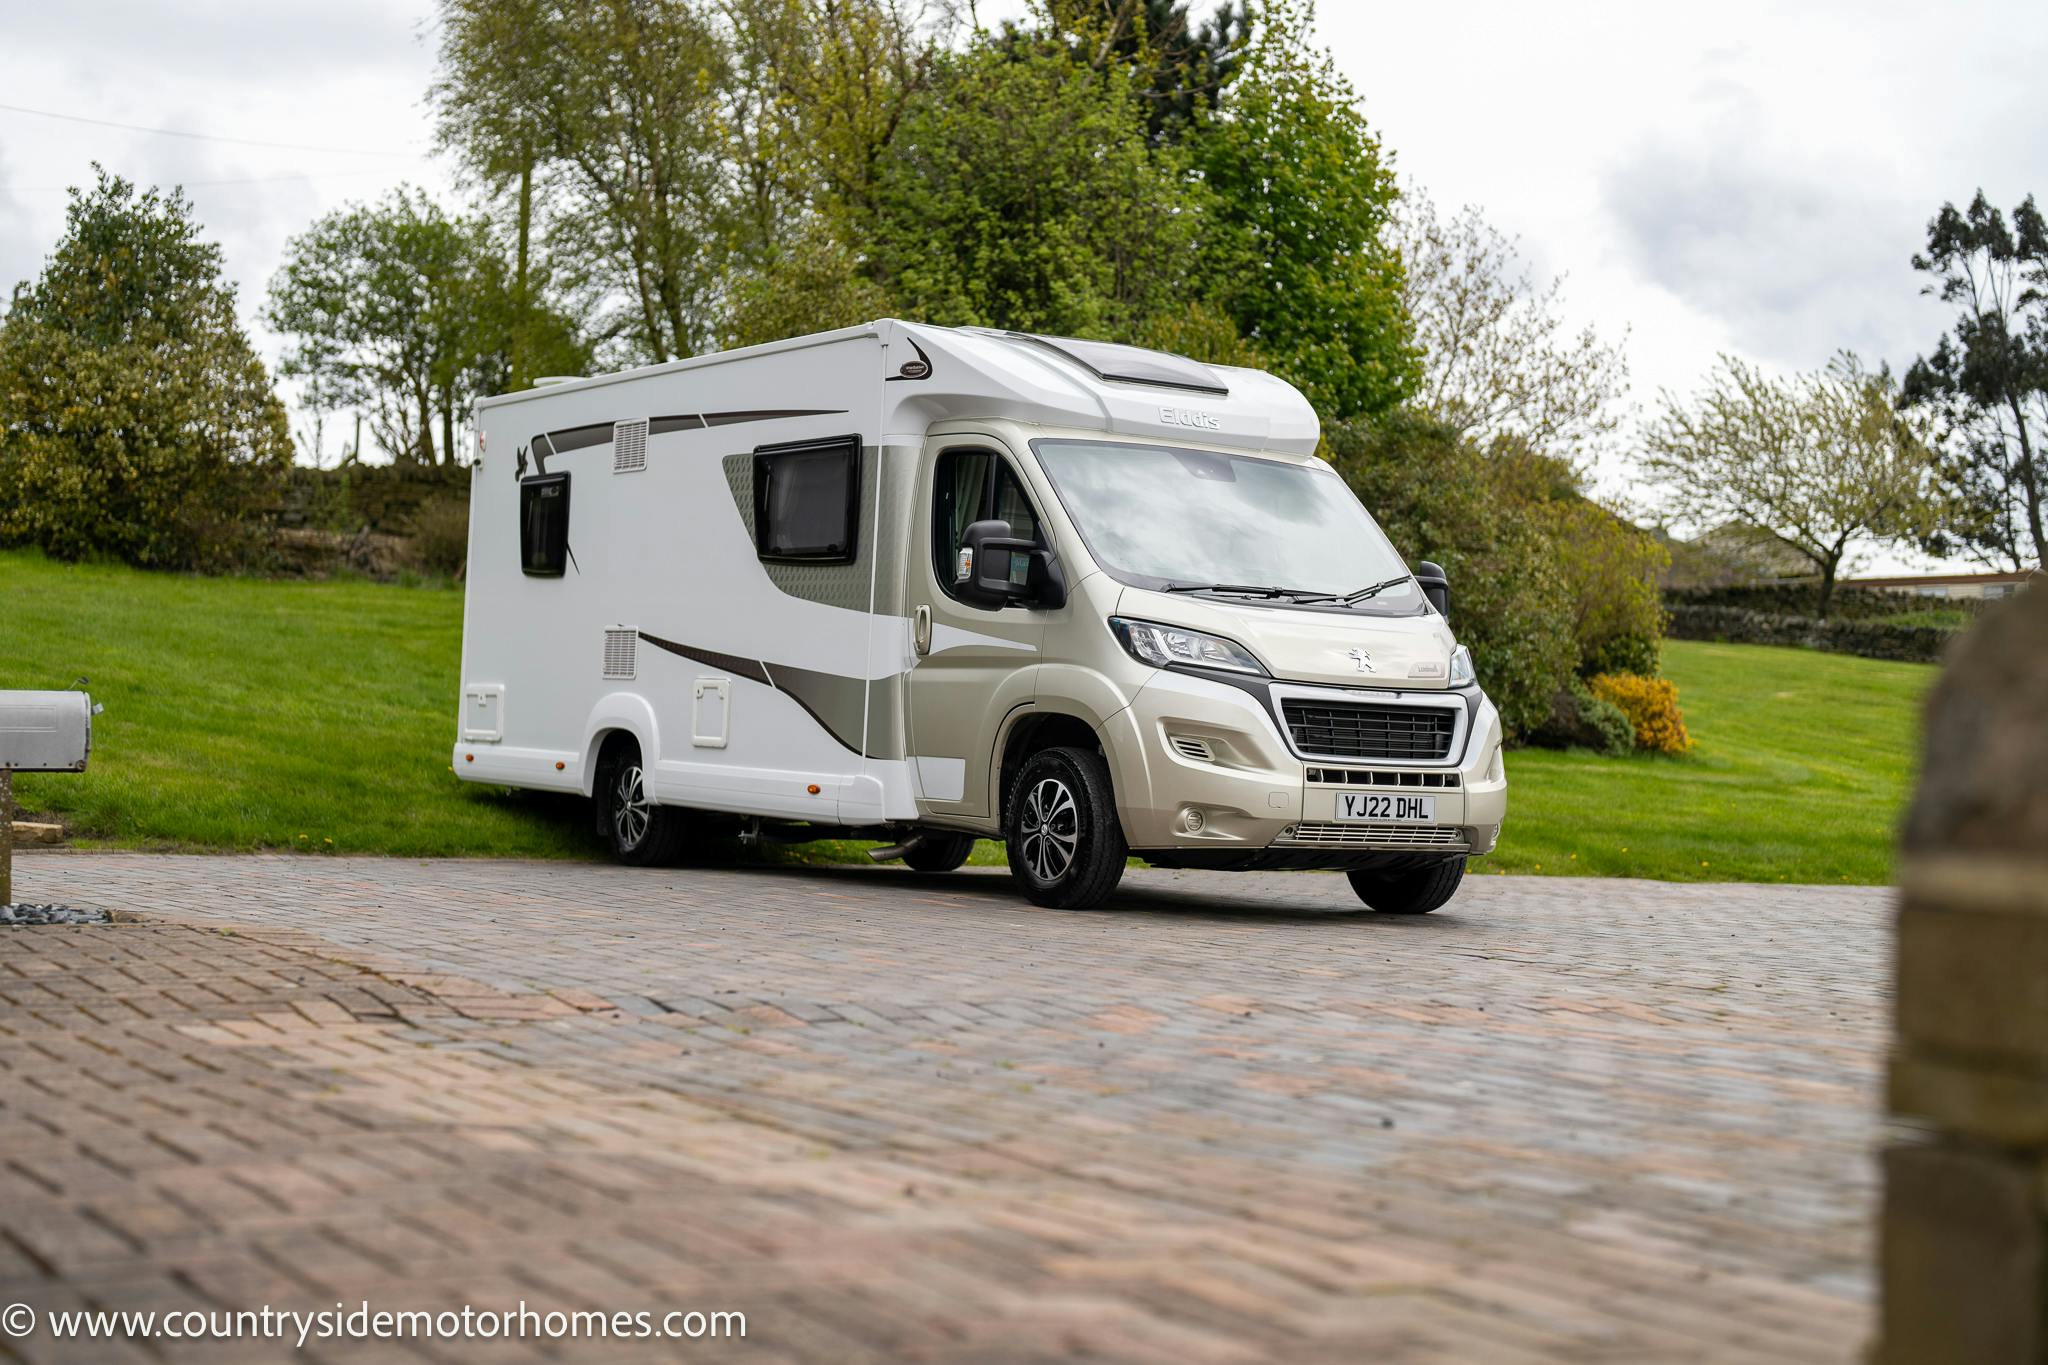 A 2022 Elddis Autoquest 150 Lombardi motorhome is parked on a paved area near a grassy lawn with trees in the background. The cream and tan vehicle features a side door and several windows. The scene appears overcast with a mix of trees and a stone wall in the distance.